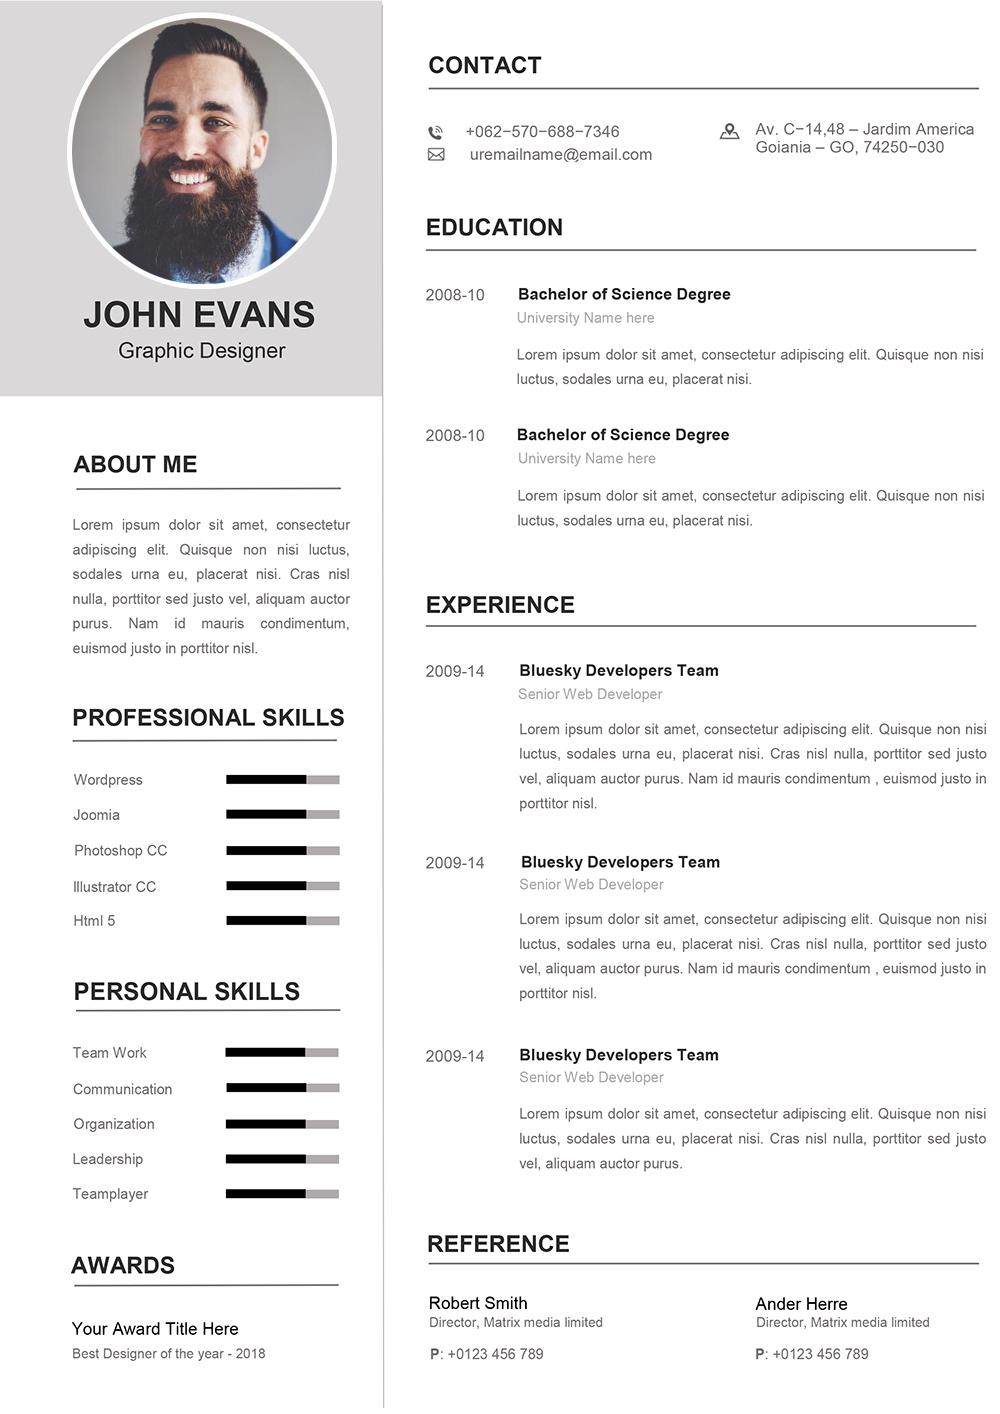 attractive resume templates free download